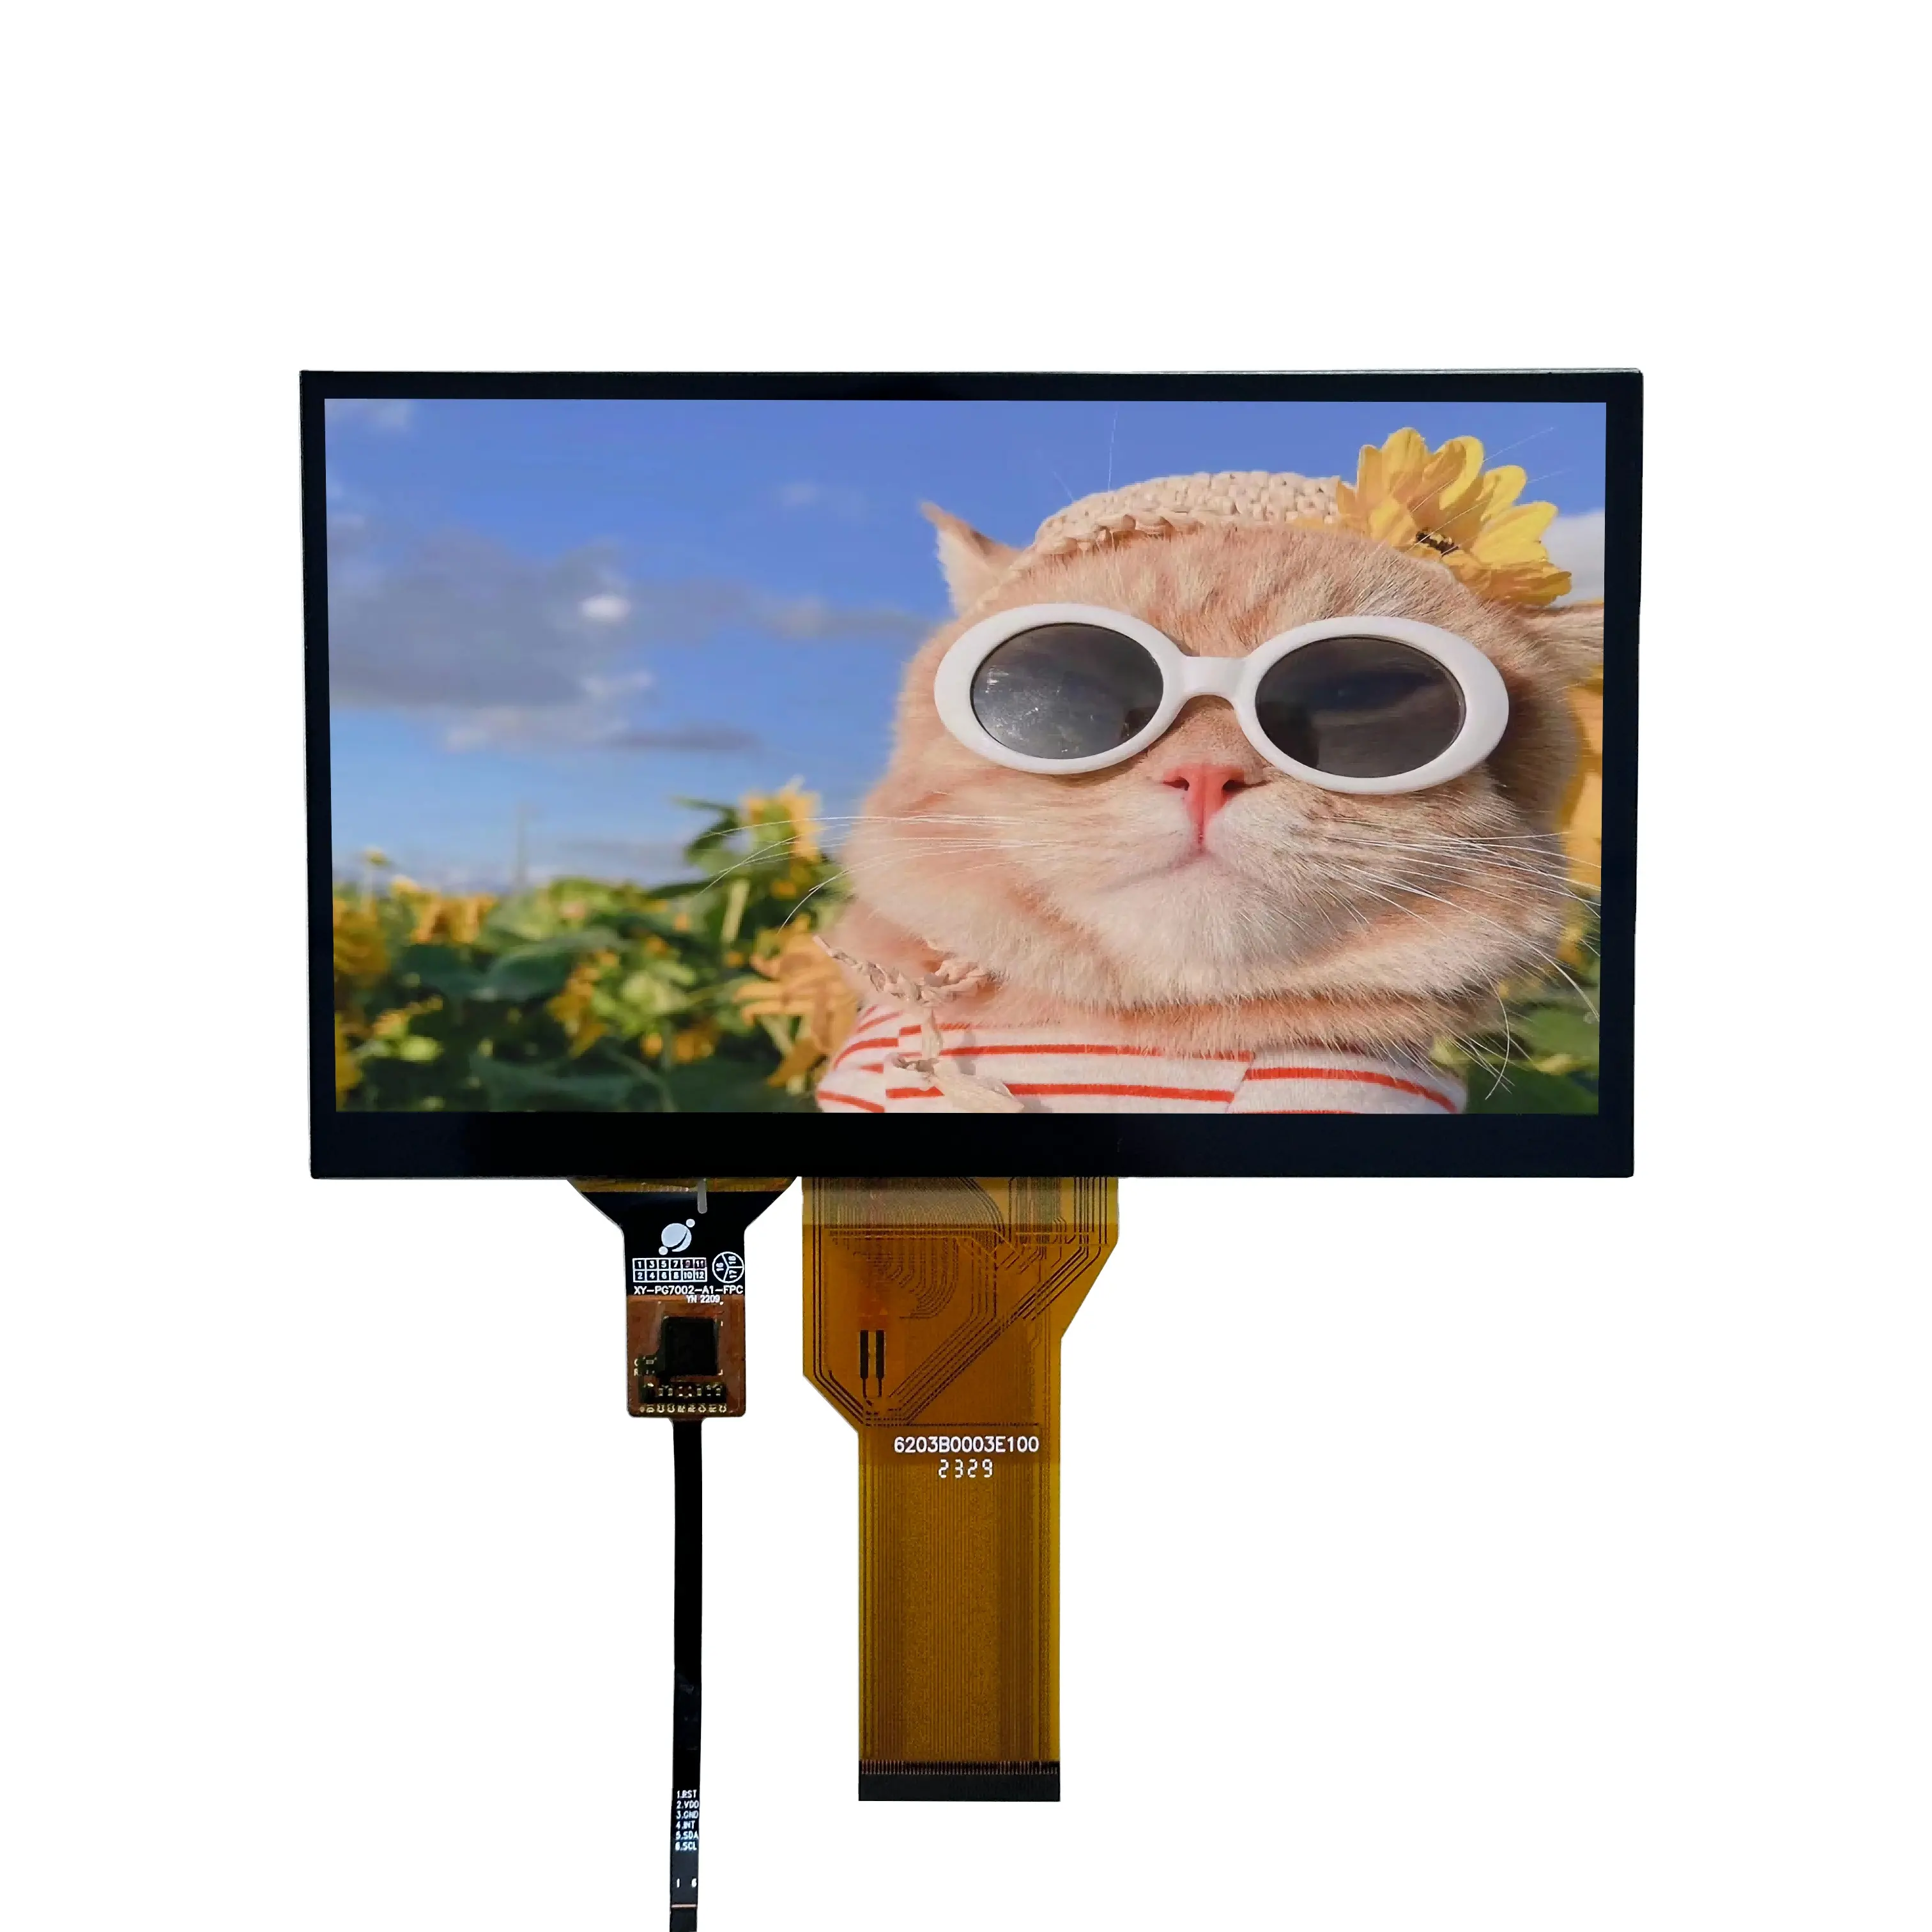 7.0 Inch Tft Lcd Display 800X480 Resolution Resistance Touch Panel Lcd Screen RGB Interface For Industry